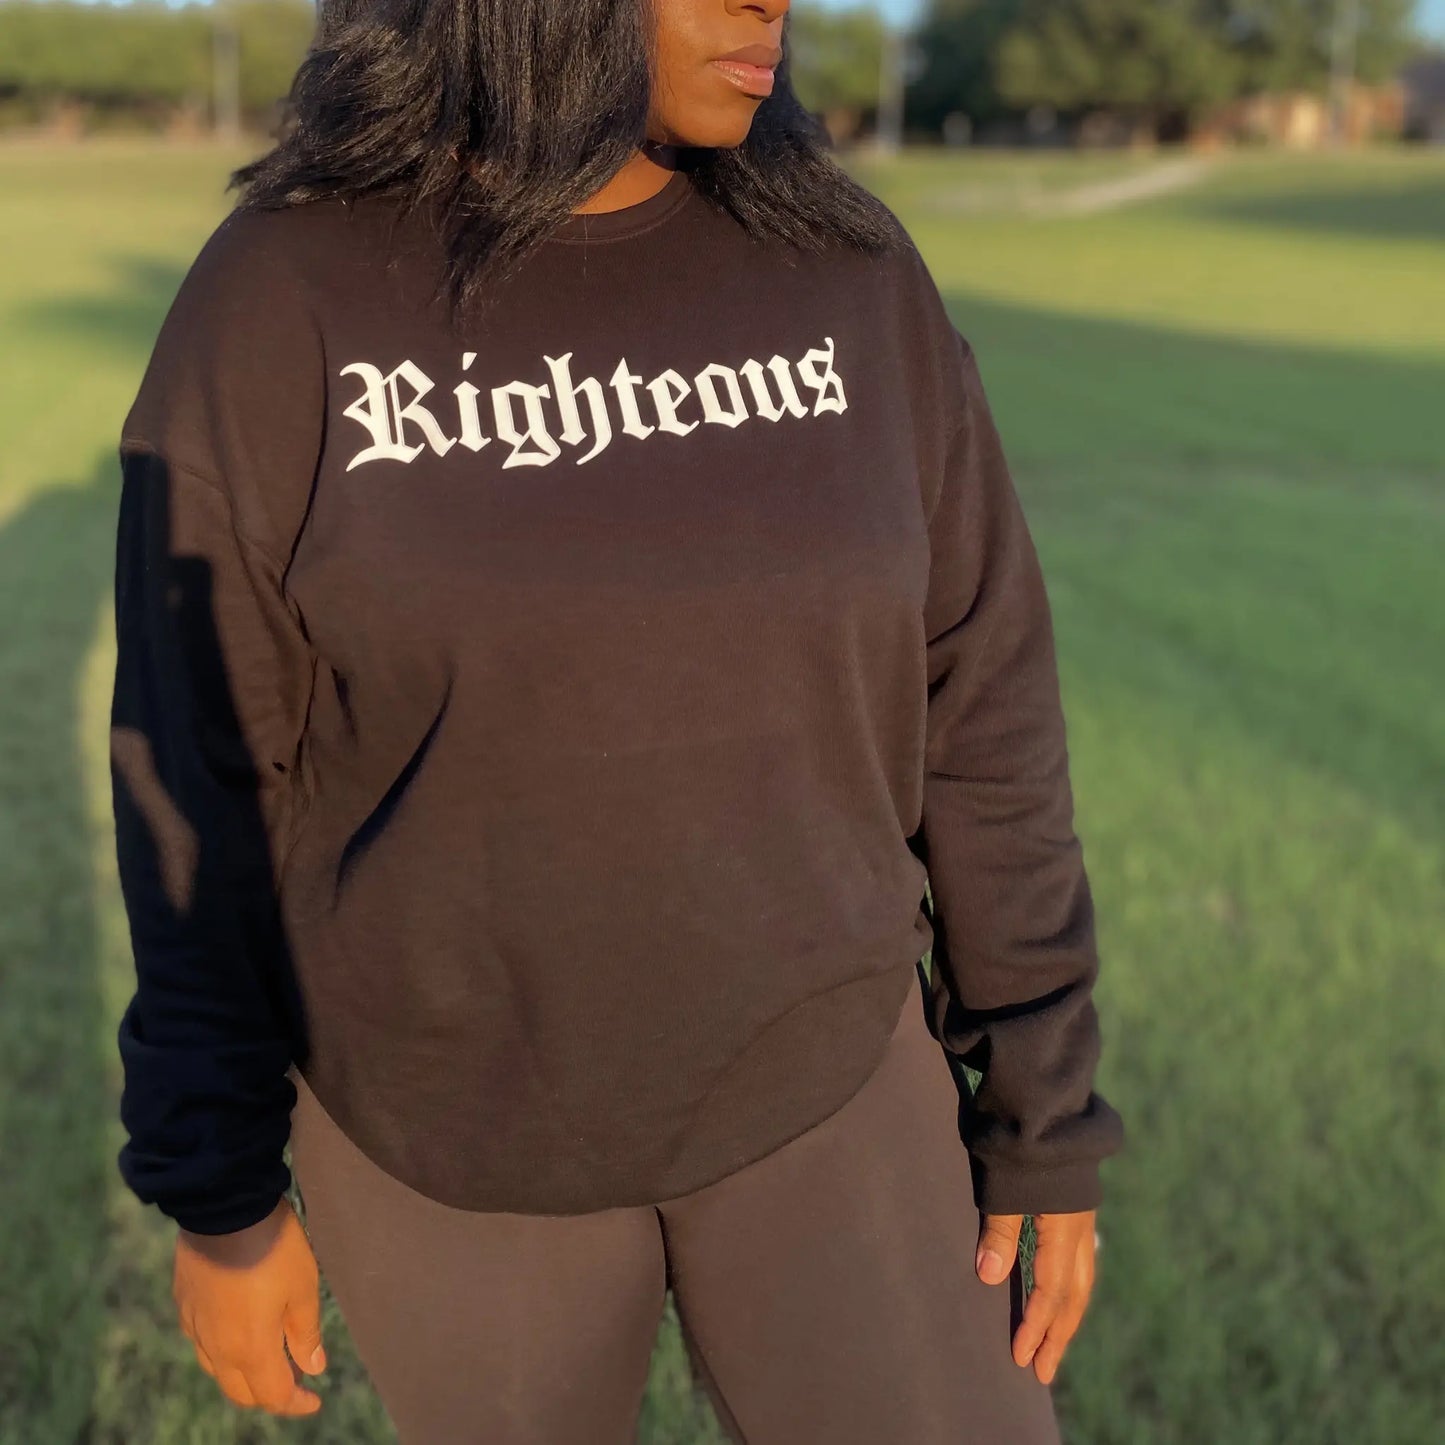 Black crew neck sweatshirt. Righteous written in bold white letters on the front of the black sweatshirt. Black sweatshirt, christian clothing, faith based apparel Righteous sweatshirt. Jesus inspired clothing. Oversized sweatshirt. loungewear. streetwear. Christian streetwear. Christian Clothing band